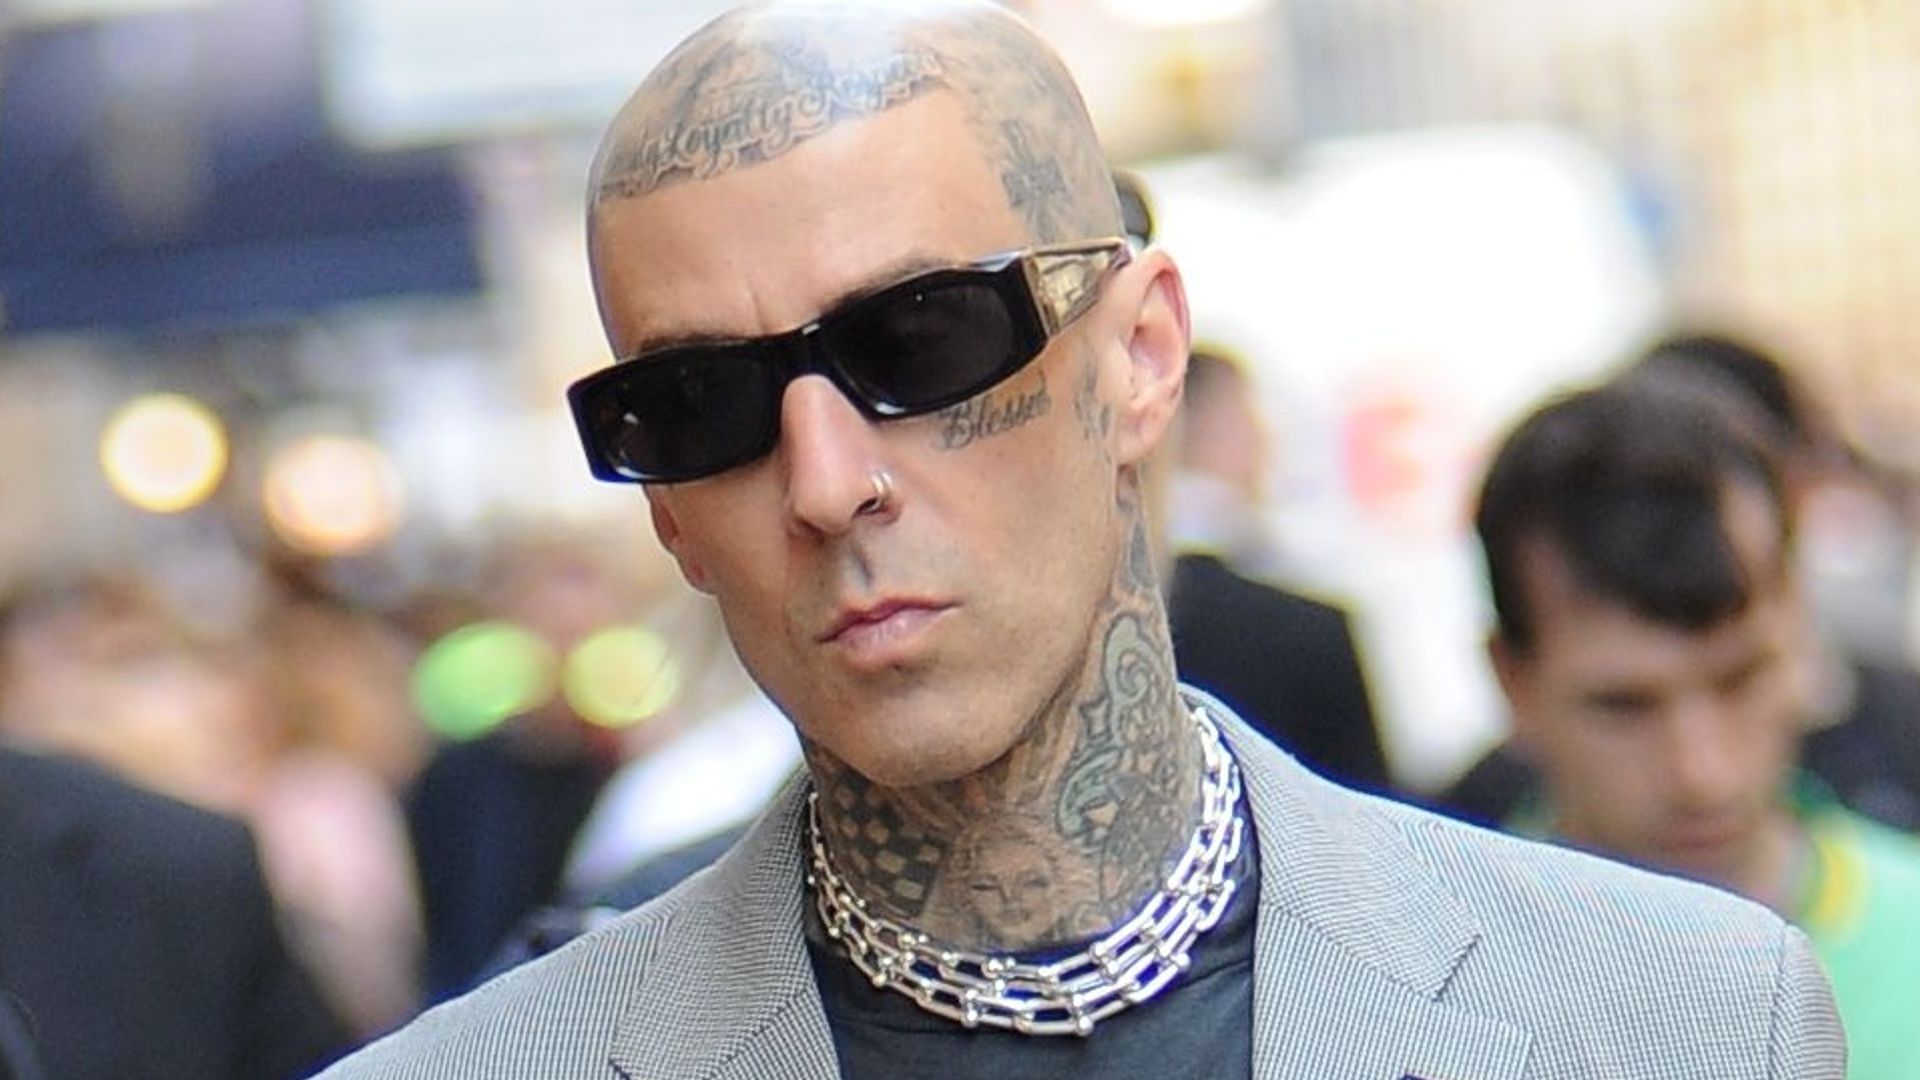 Travis Barker in a grey jacket and sunglasses 